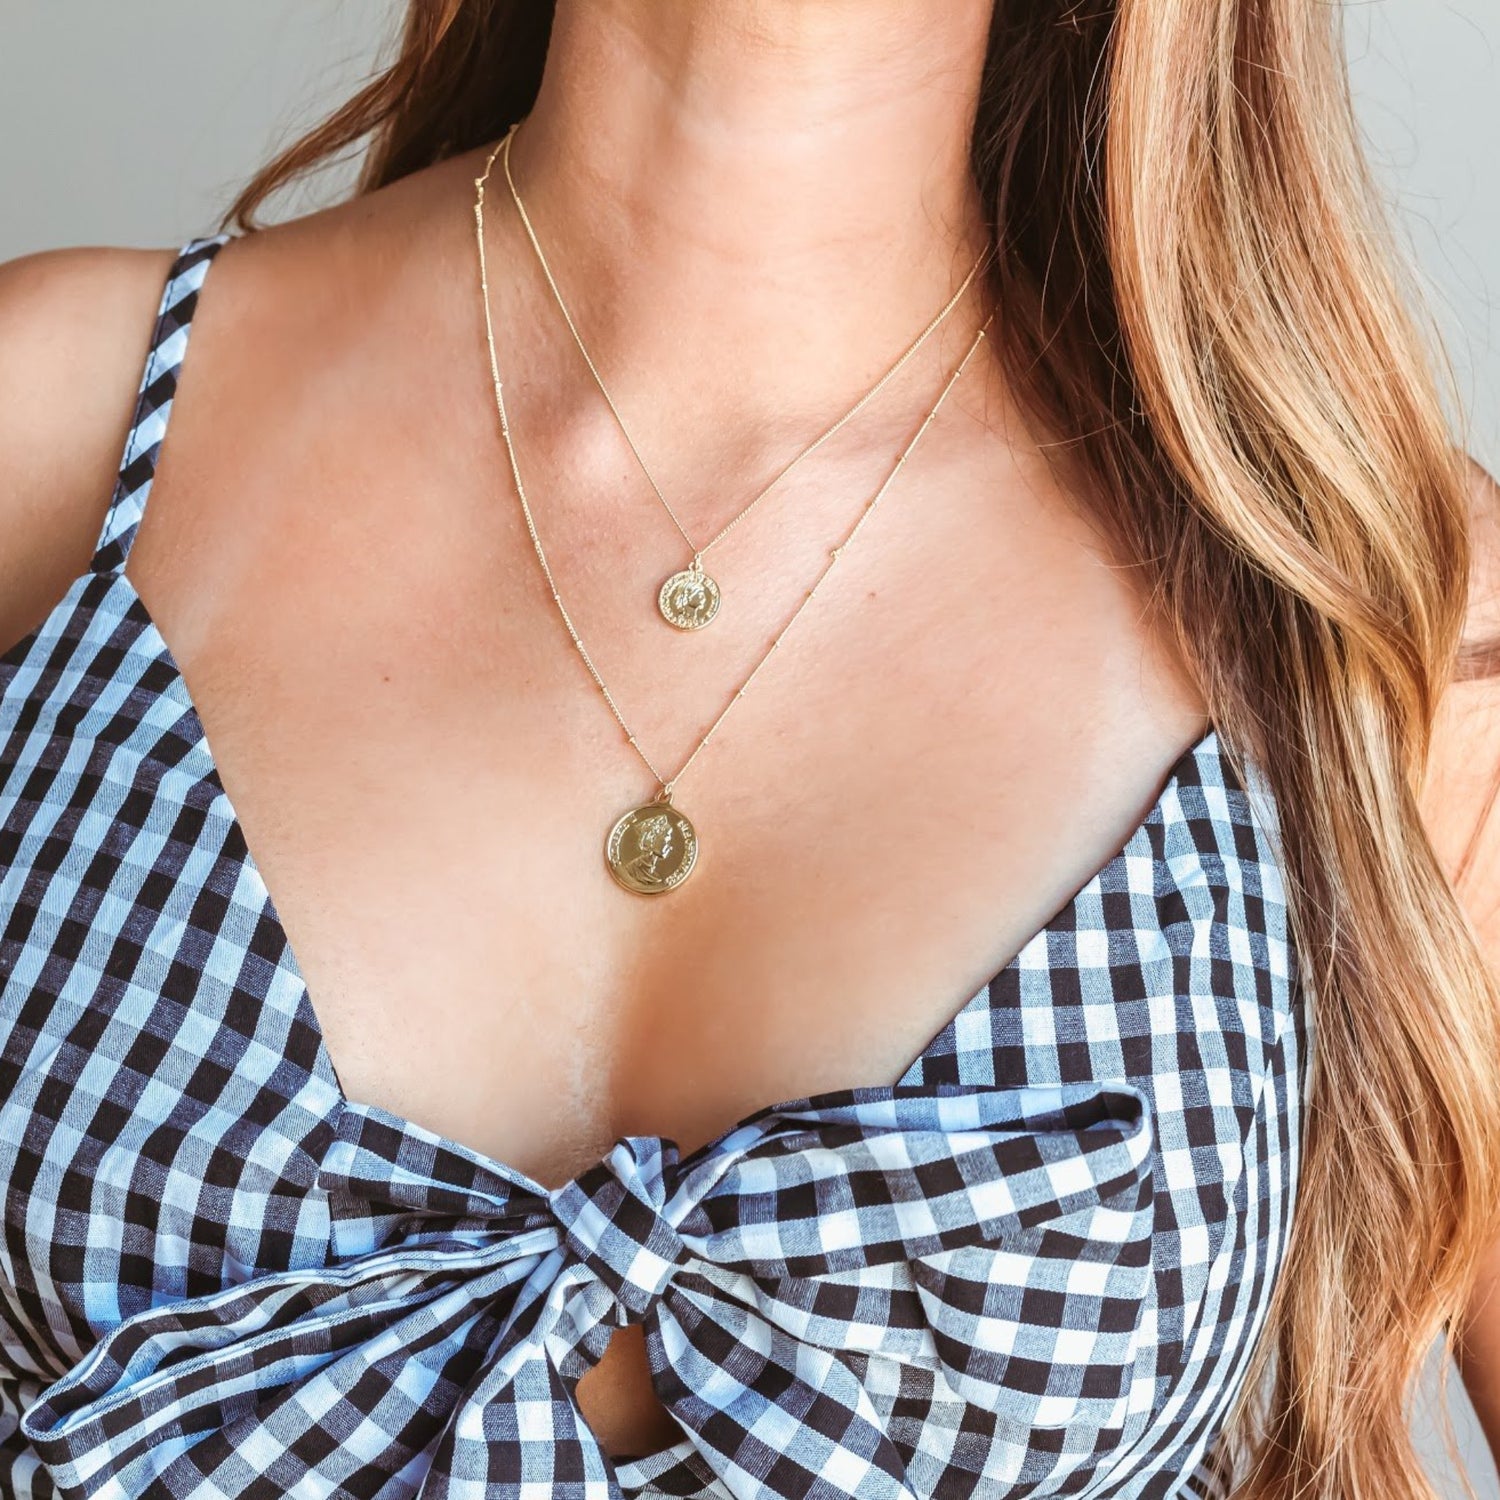 Republique francaise coin necklace, gold-filled chain. By ISVI Boutique Miami